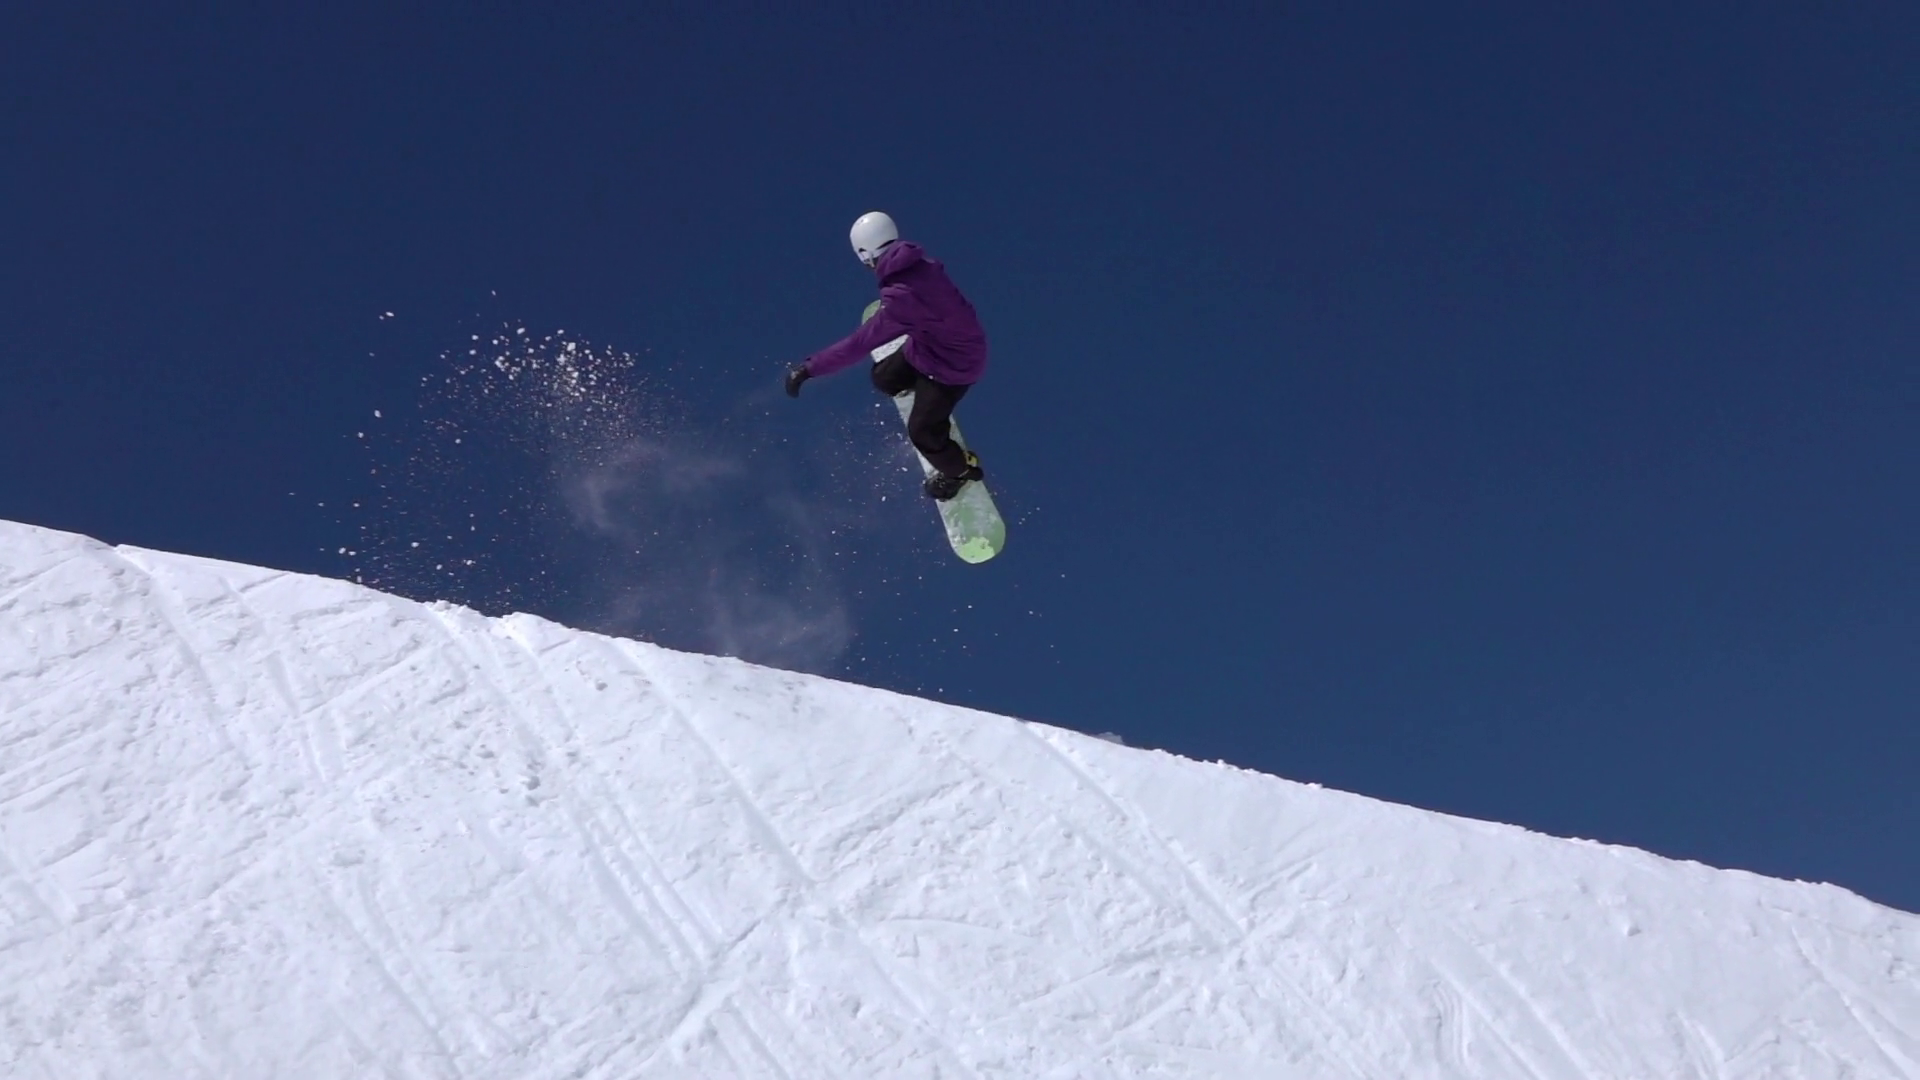 SLOW MOTION: Young pro snowboarder jumping in half pipe snow park ...